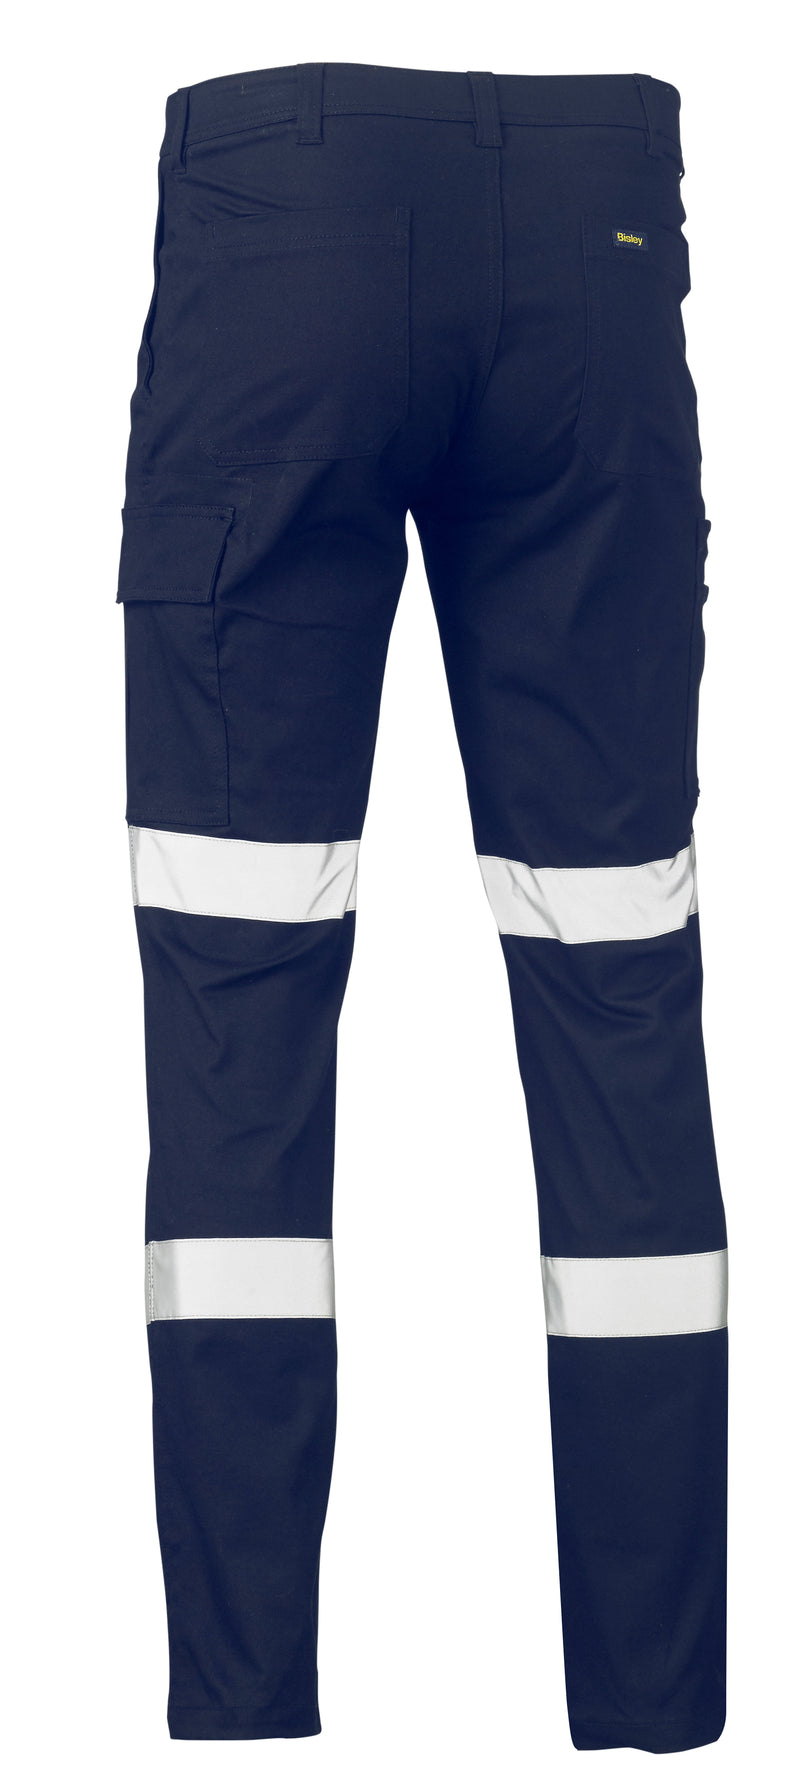 Load image into Gallery viewer, Wholesale BPC6008T Bisley Taped Biomotion Stretch Cotton Drill Cargo Pants - Long Printed or Blank
